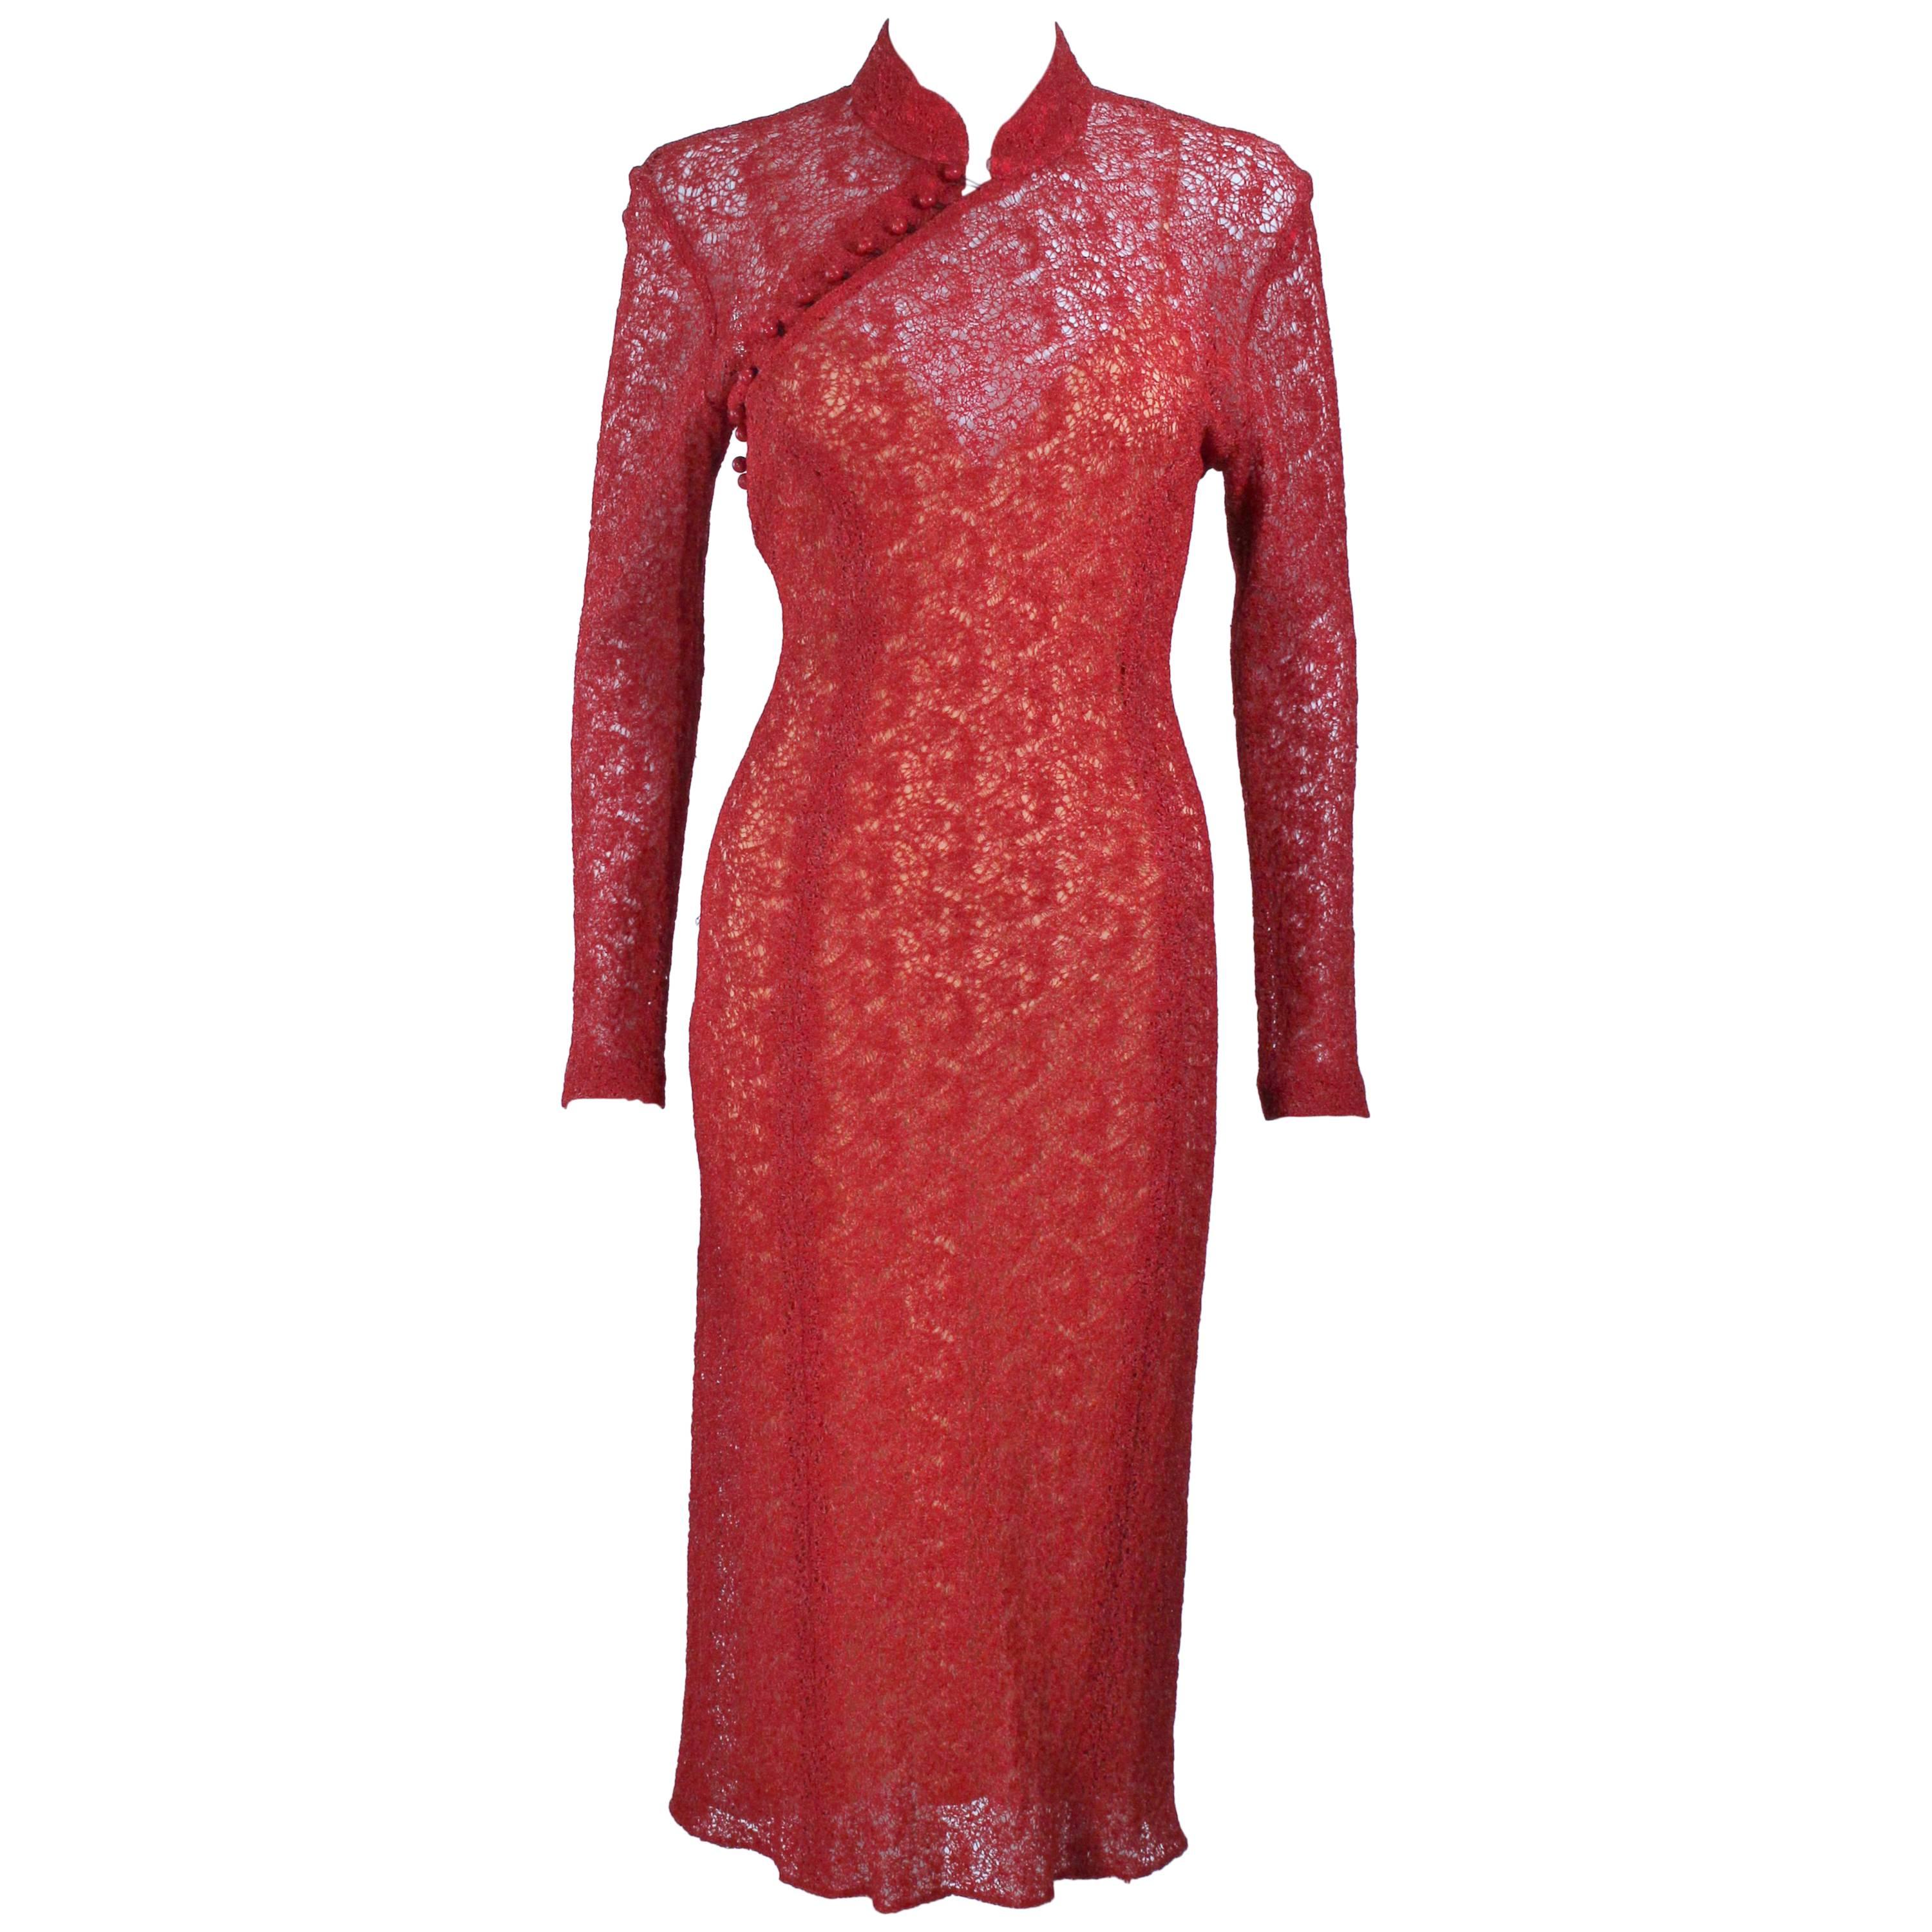 MONIQUE LHUILLIER Asian Inspired Deep Coral Knit lace Cocktail Dress Size 8